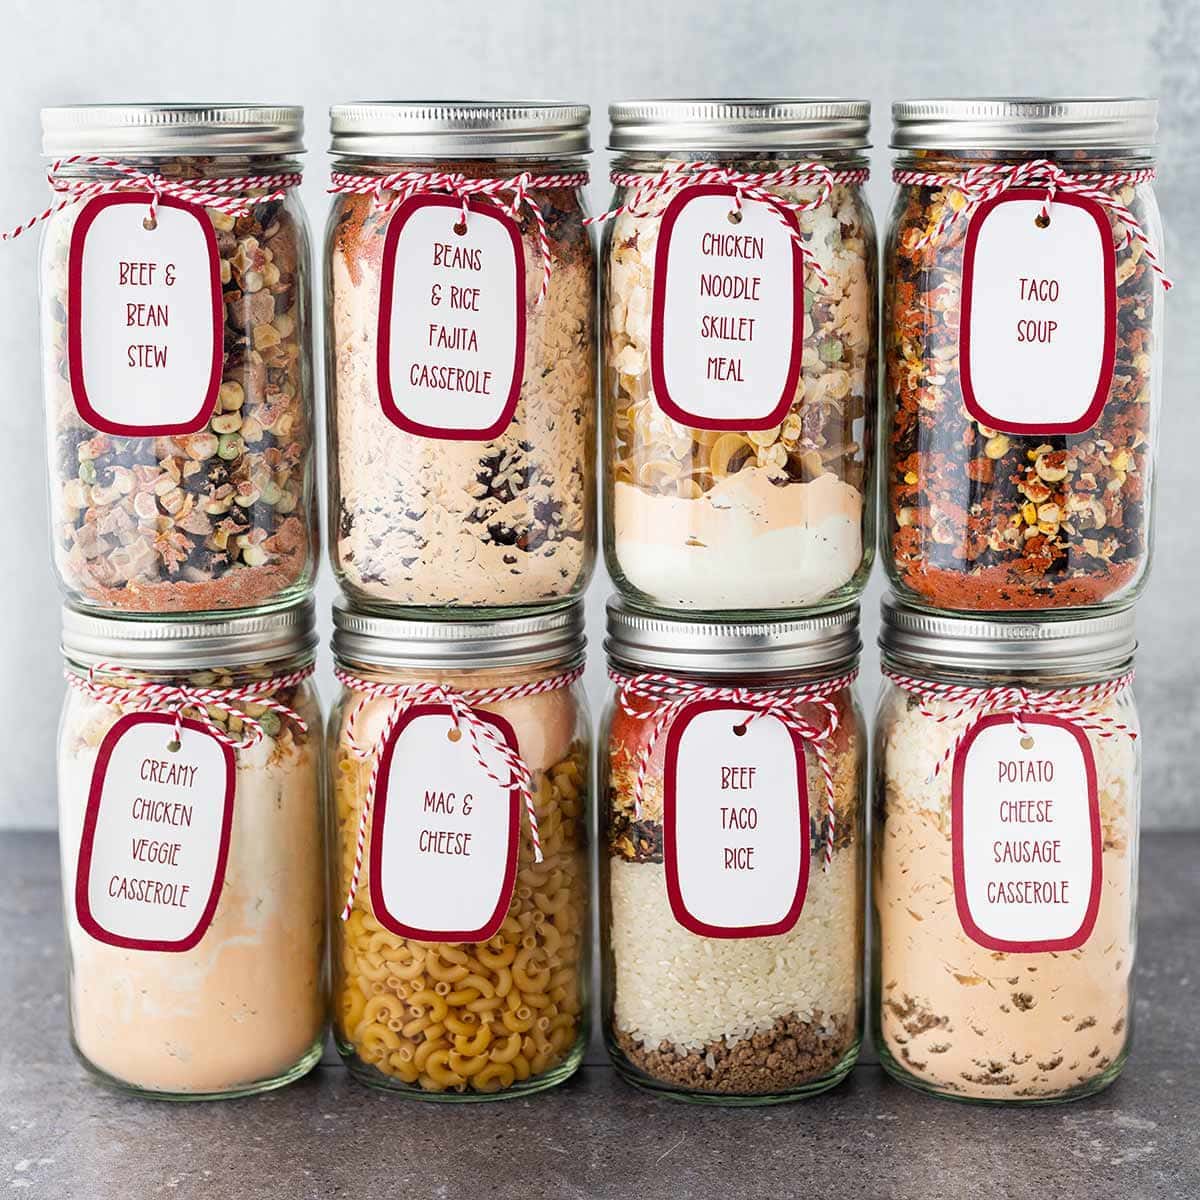 Eight quart jars, stacked on top of each other, in front of gray background, with printed labels tied to the outside of each jar and each filled with the dry ingredients to make a meal in a jar.